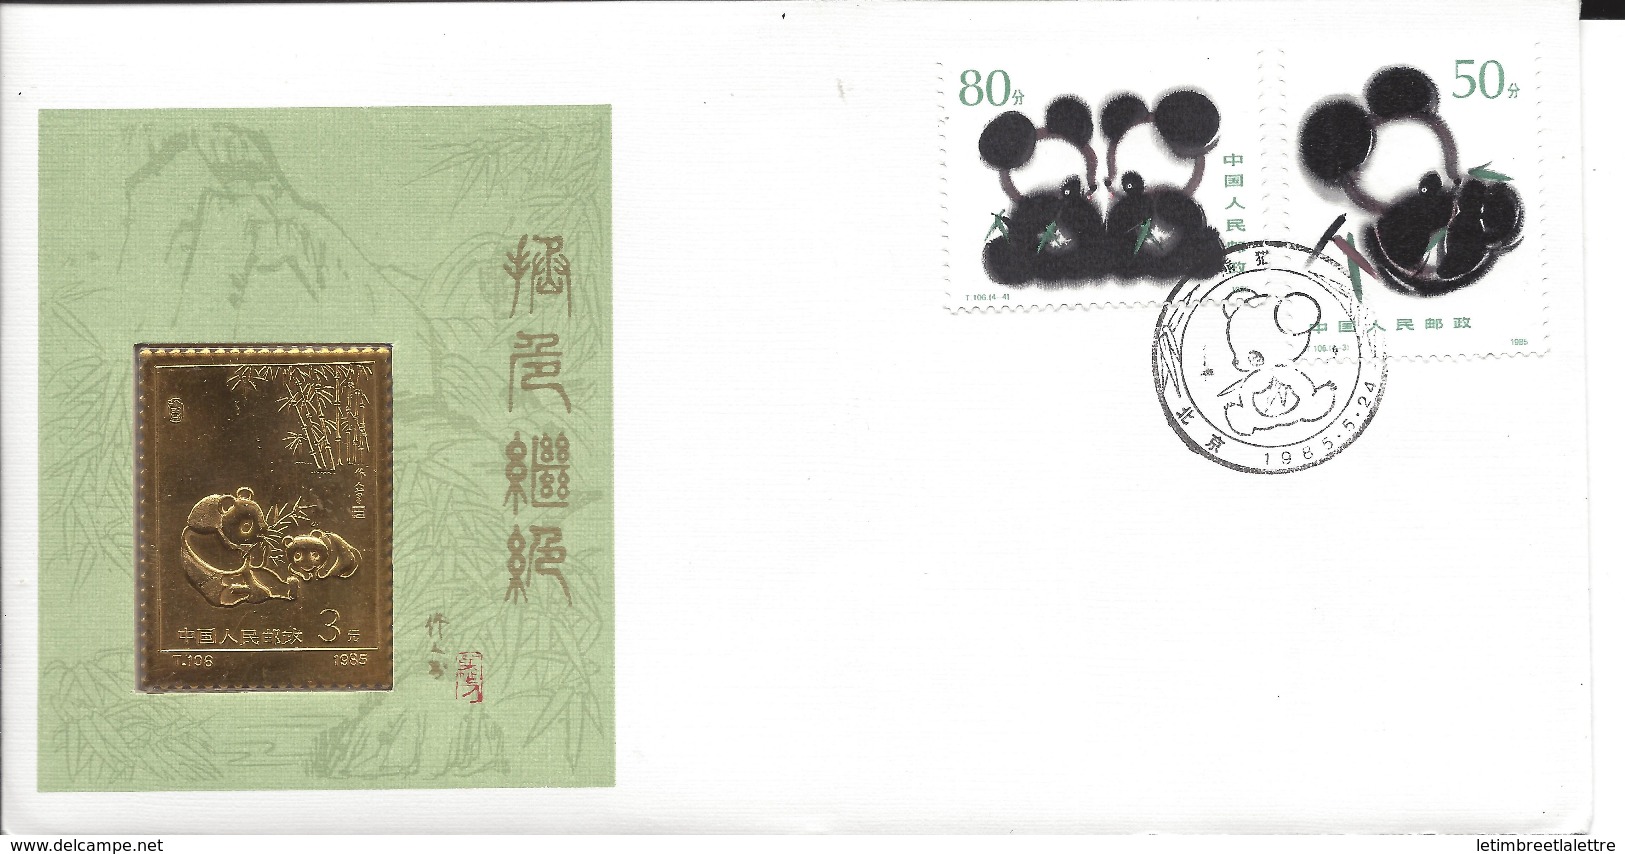 ⭐ Chine - Timbre En Or - Panda - 1985 ⭐ - Lettres & Documents